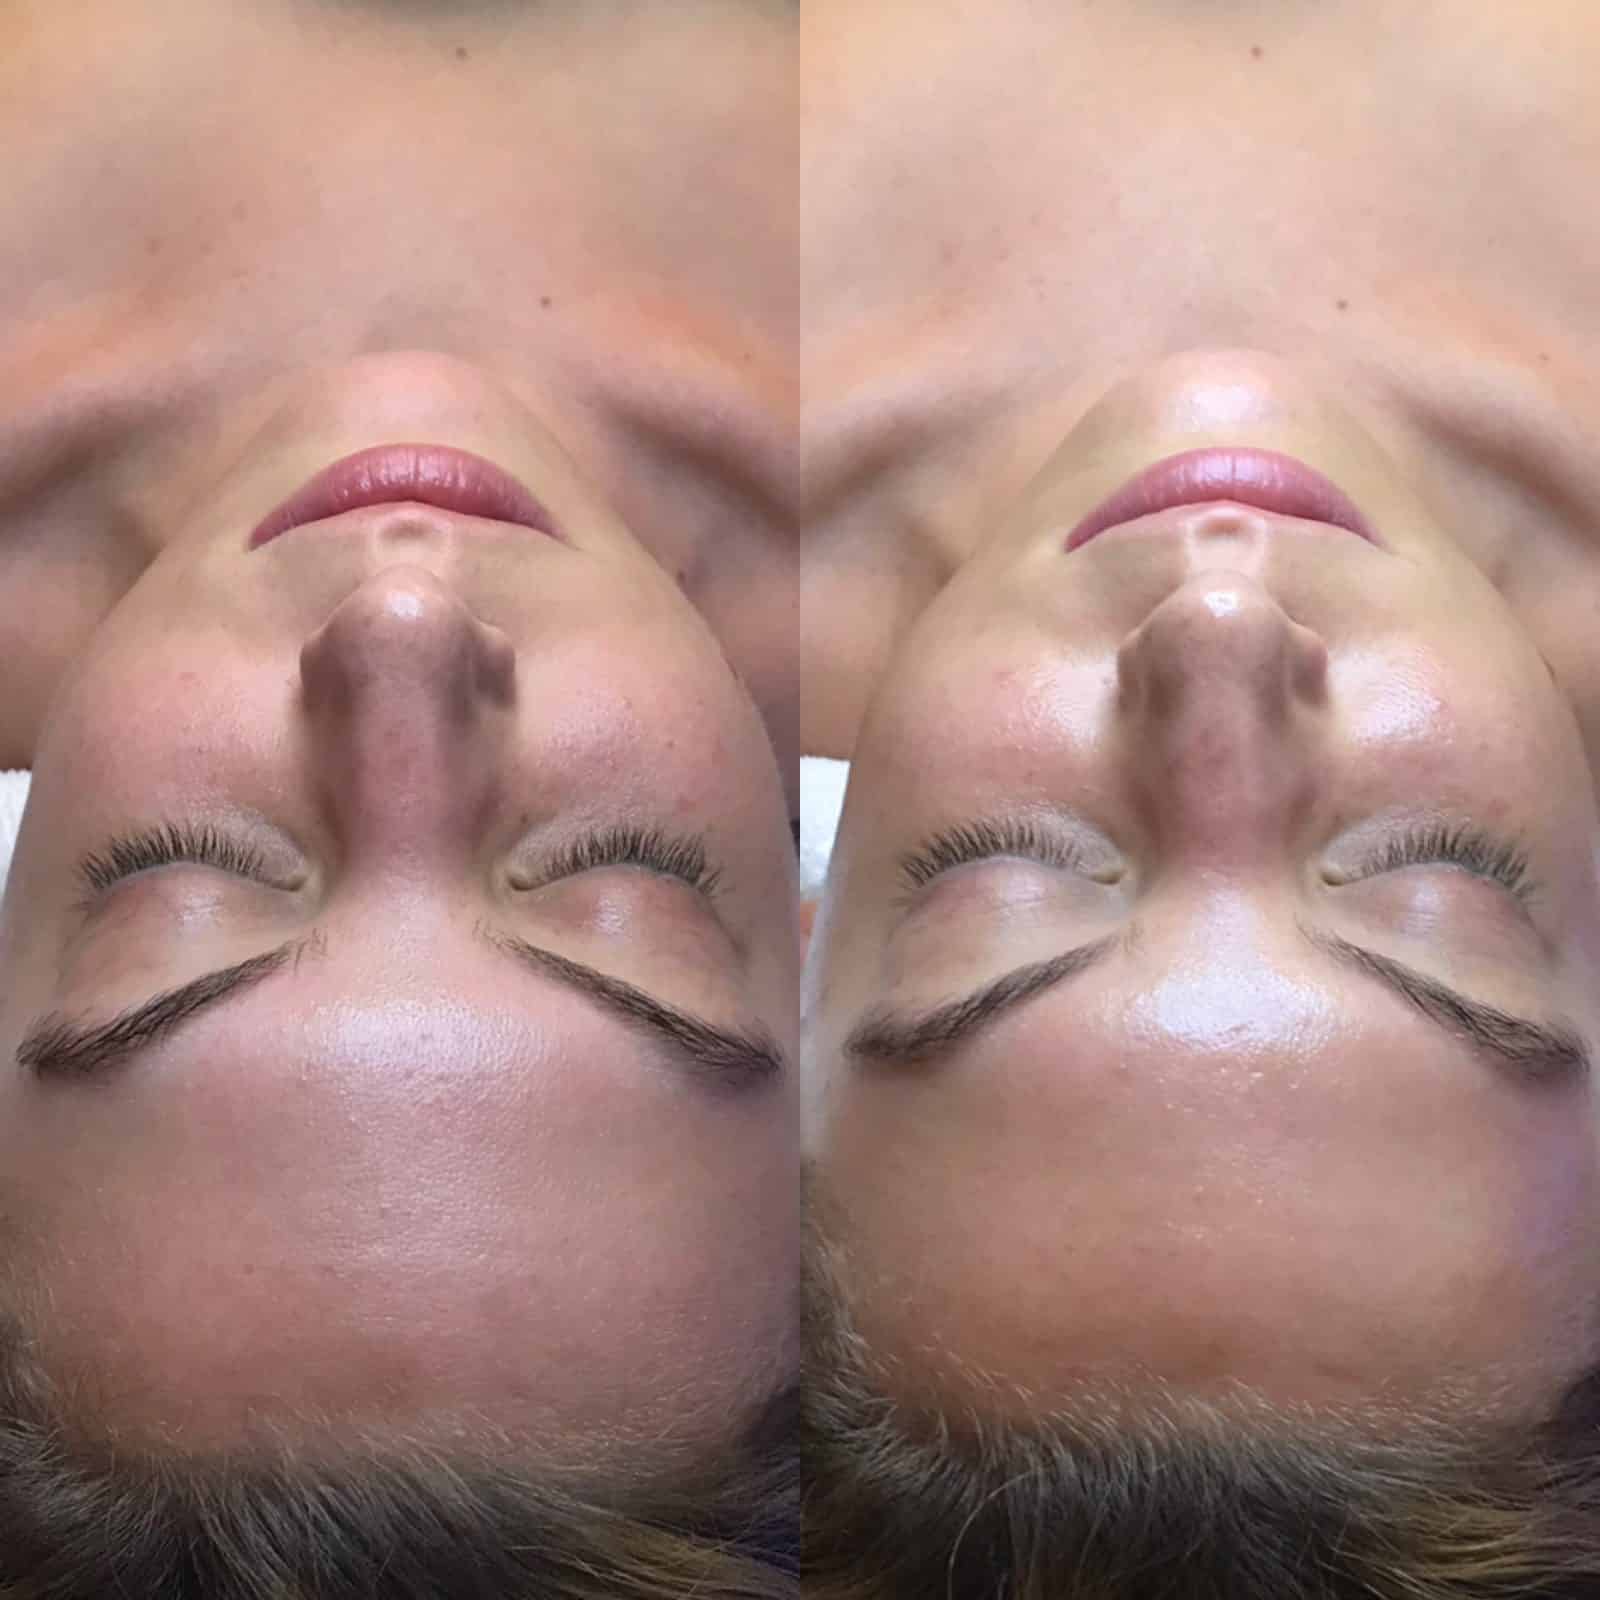 Hydrafacial before and after